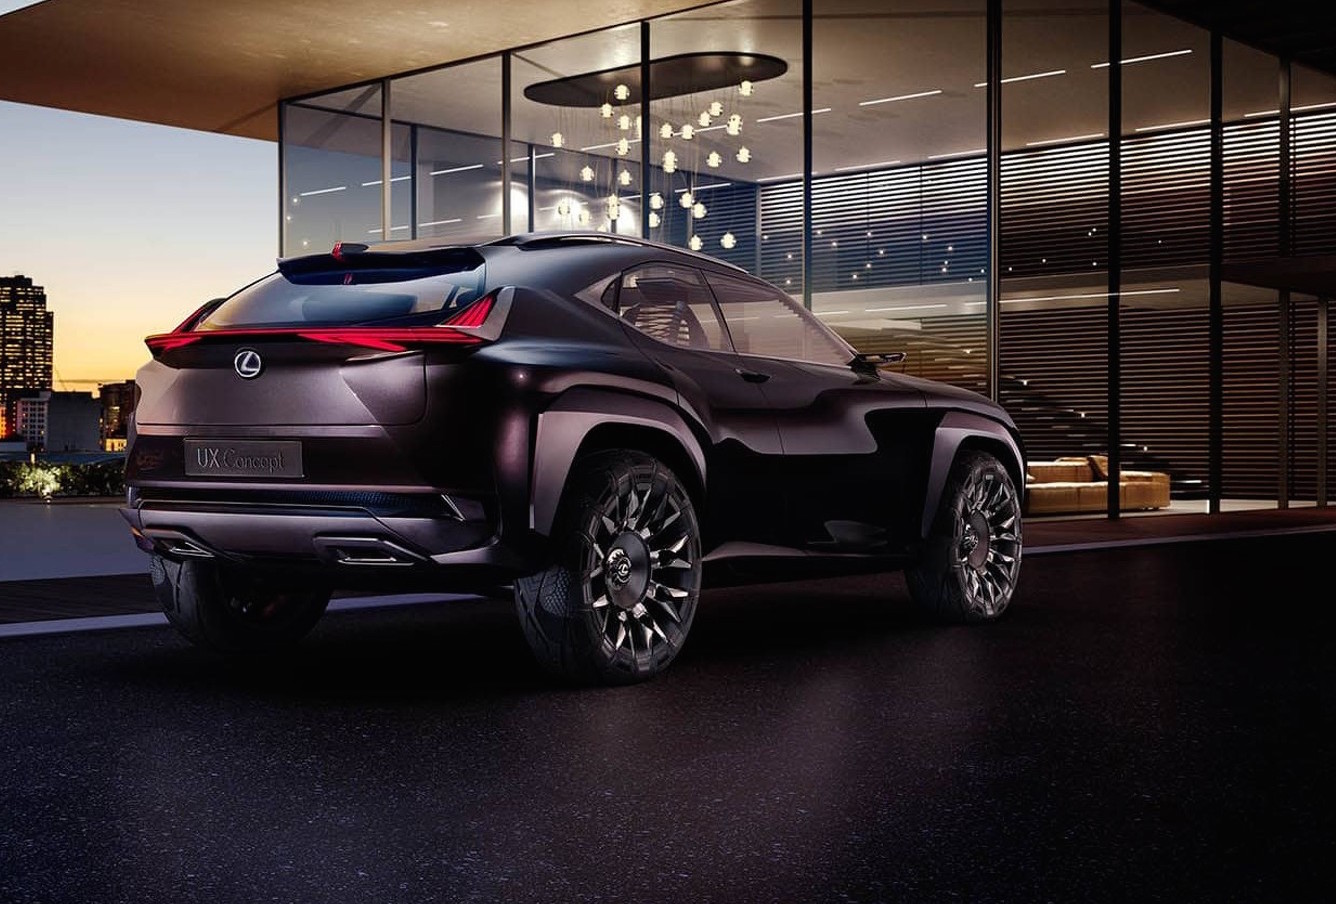 Lexus UX concept leaked, to inspire new compact SUV